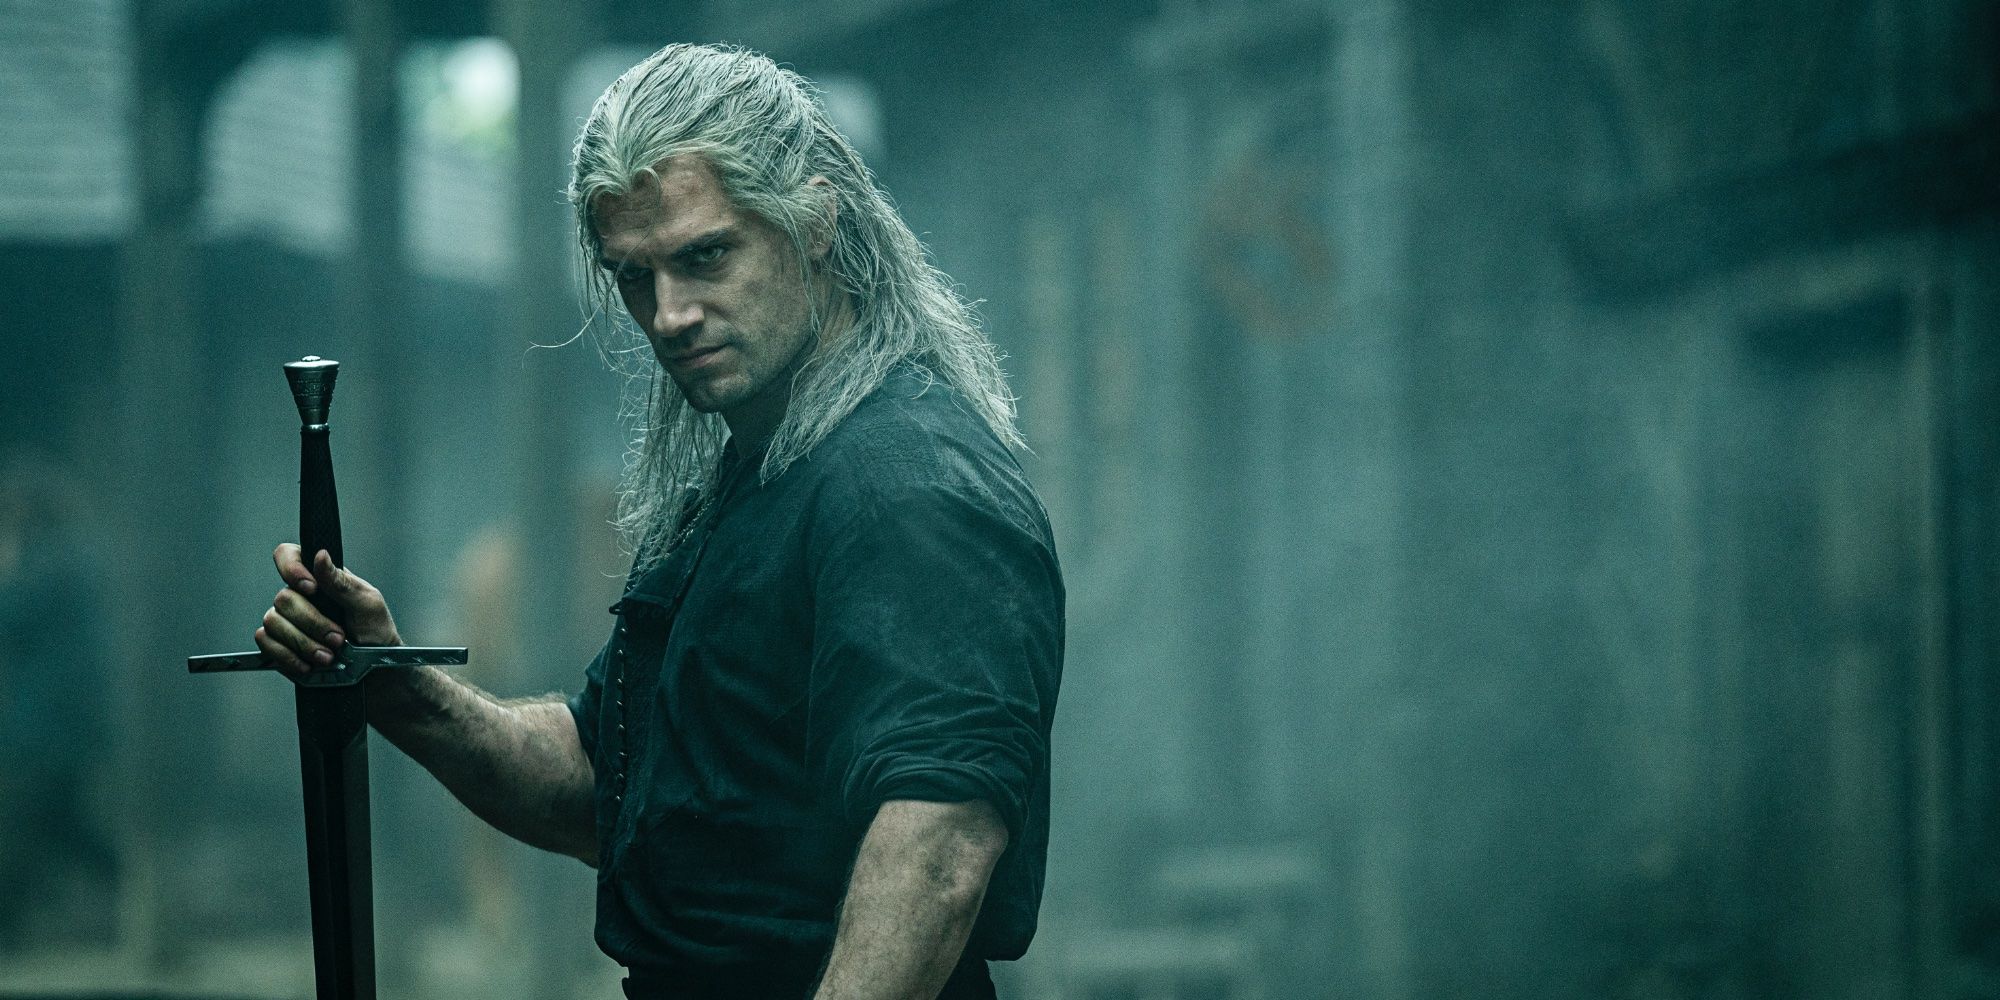 Henry Cavill in The Witcher Season 1 Netflix